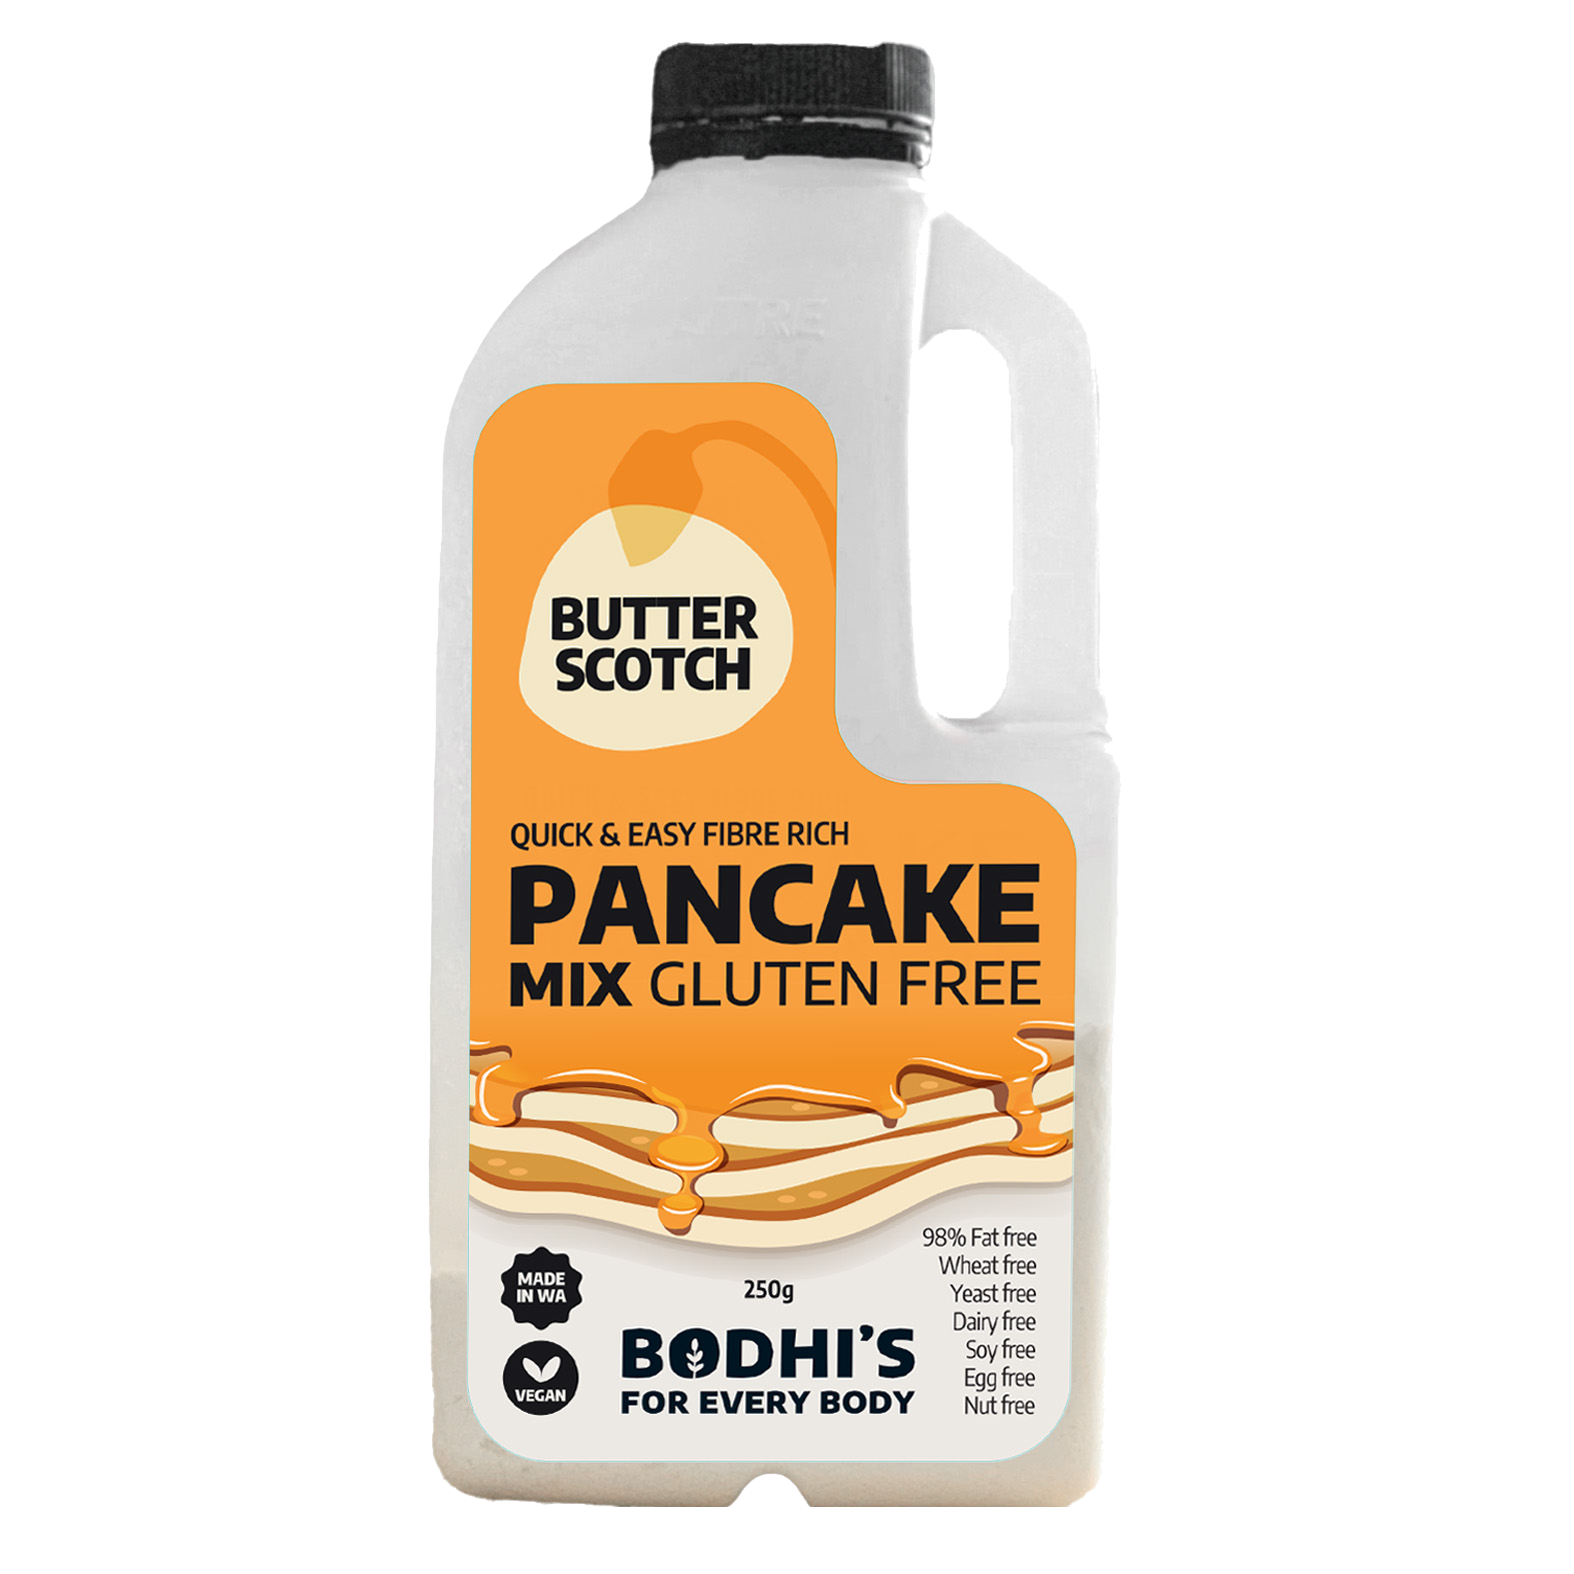 A photo showing a shake and make bottle with Bodhi's Gluten Free Butterscotch Pancake mix 